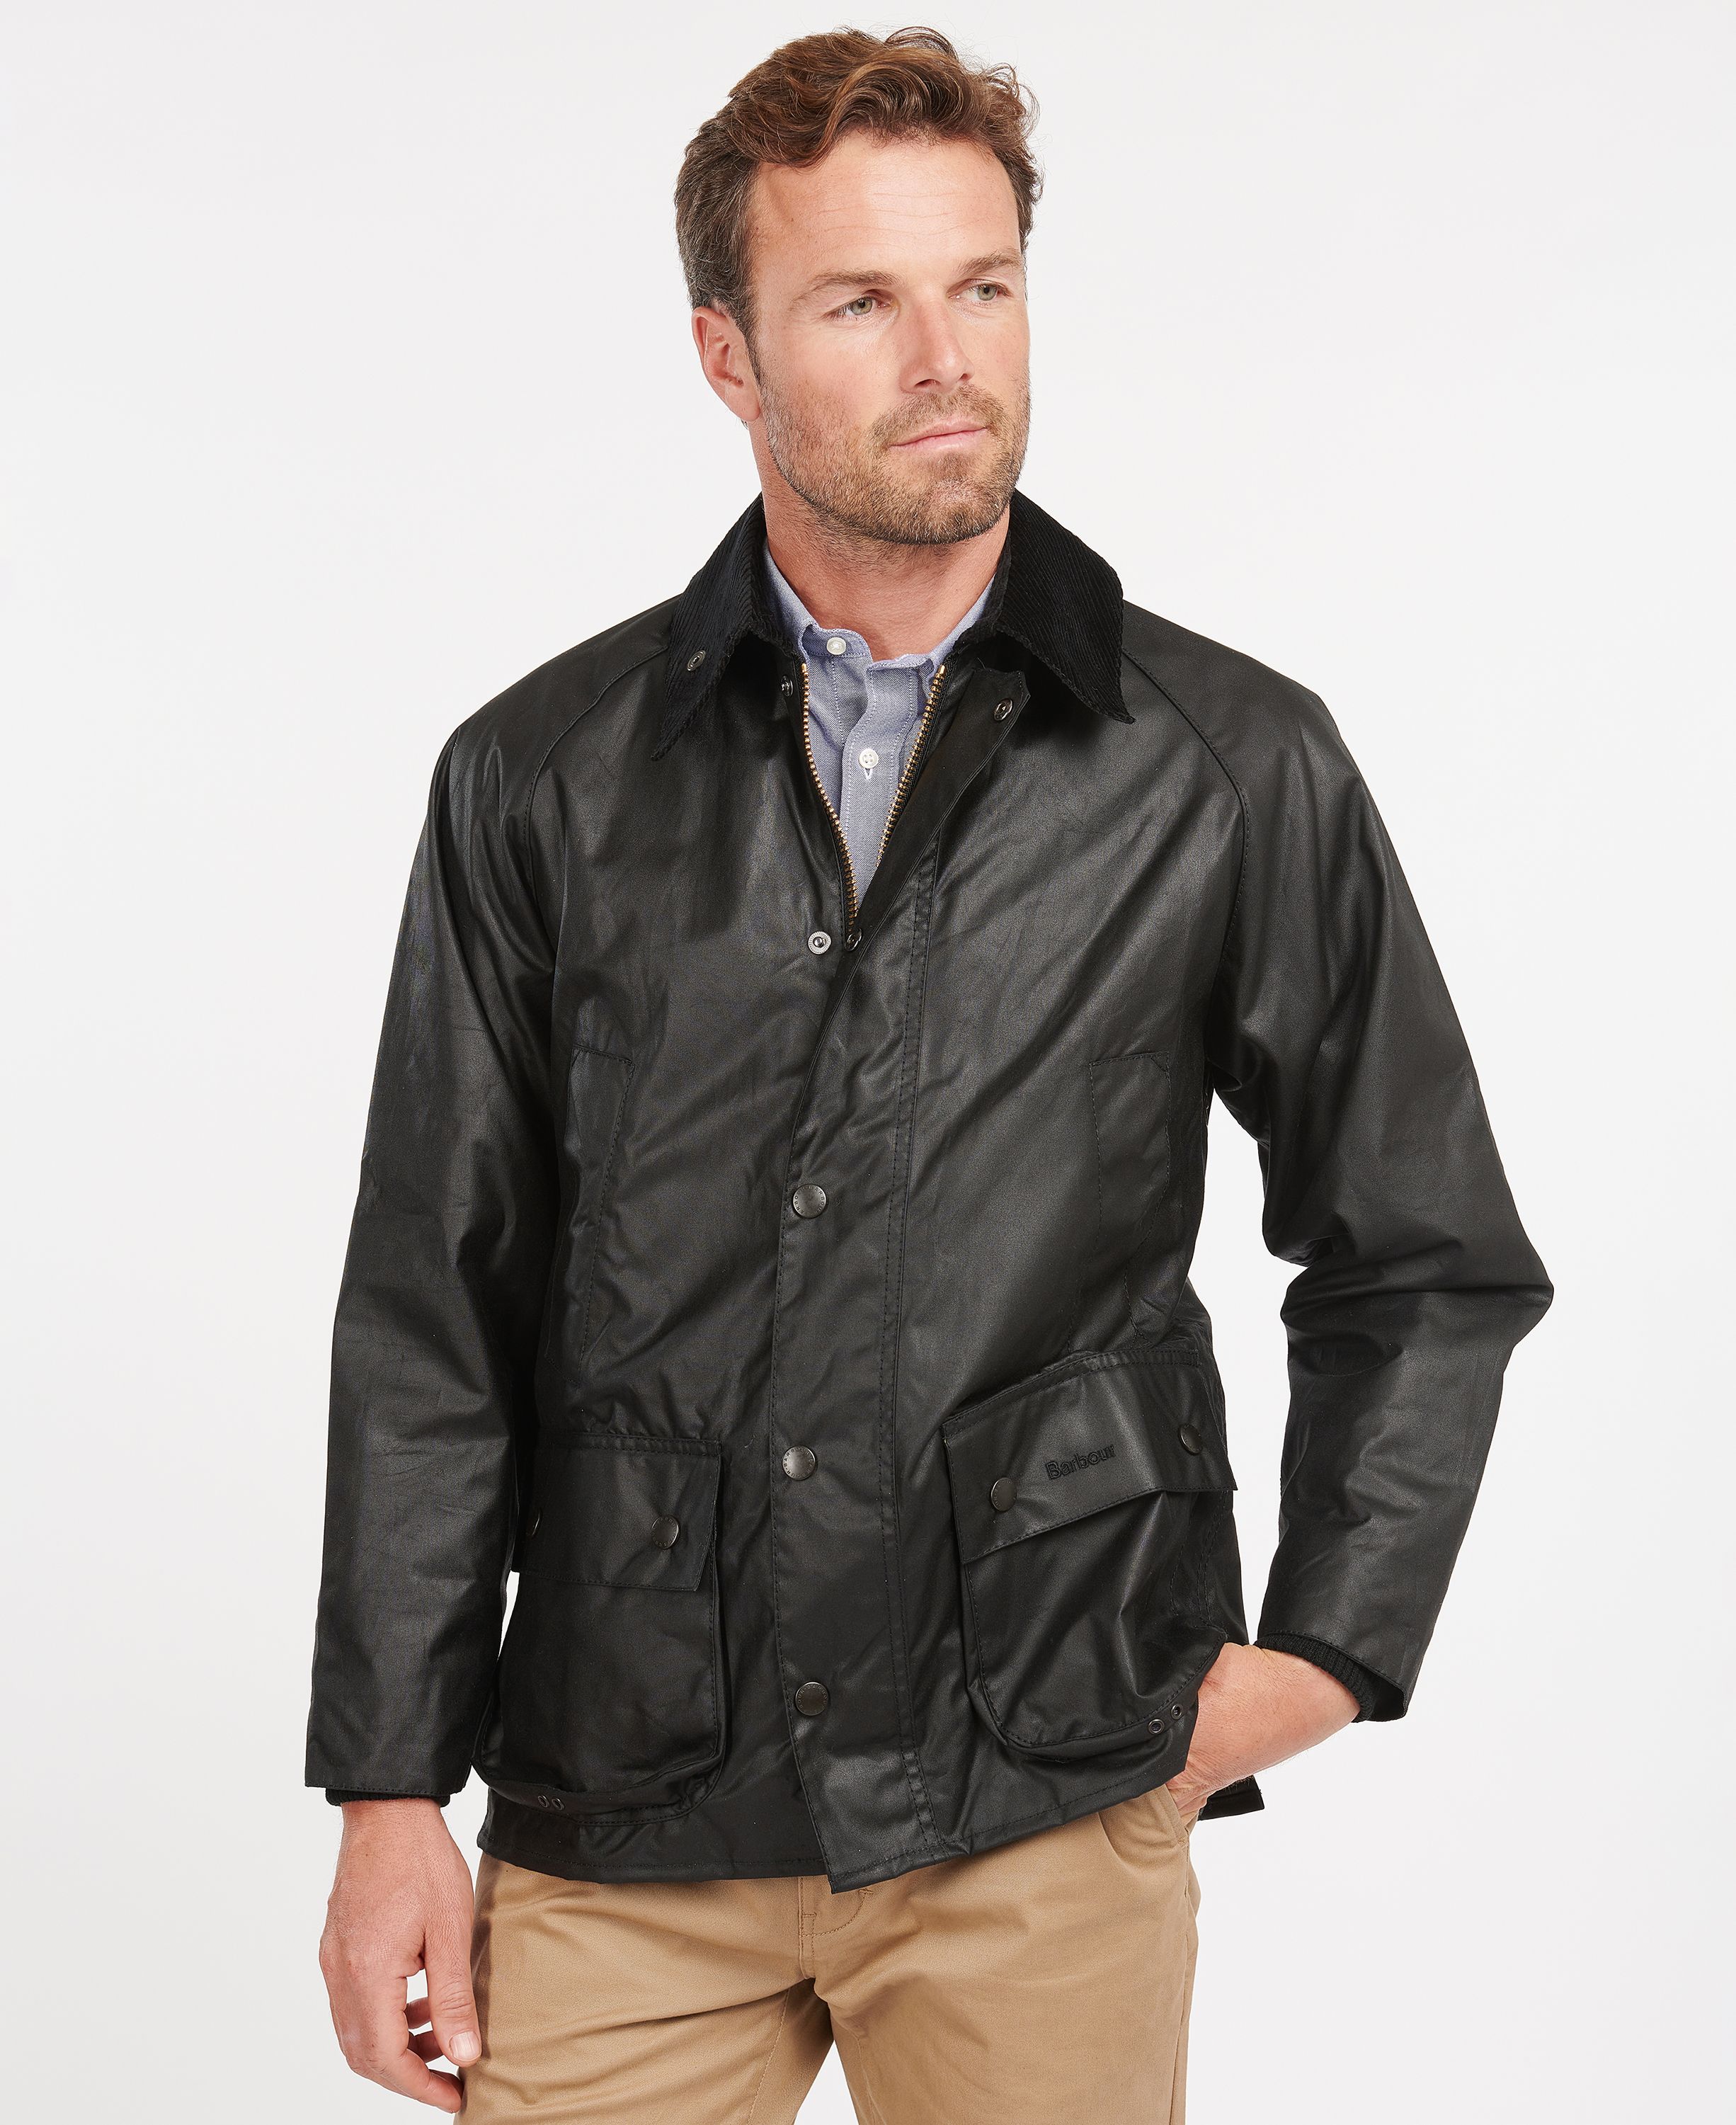 Barbour Classic Bedale Wax Jacket